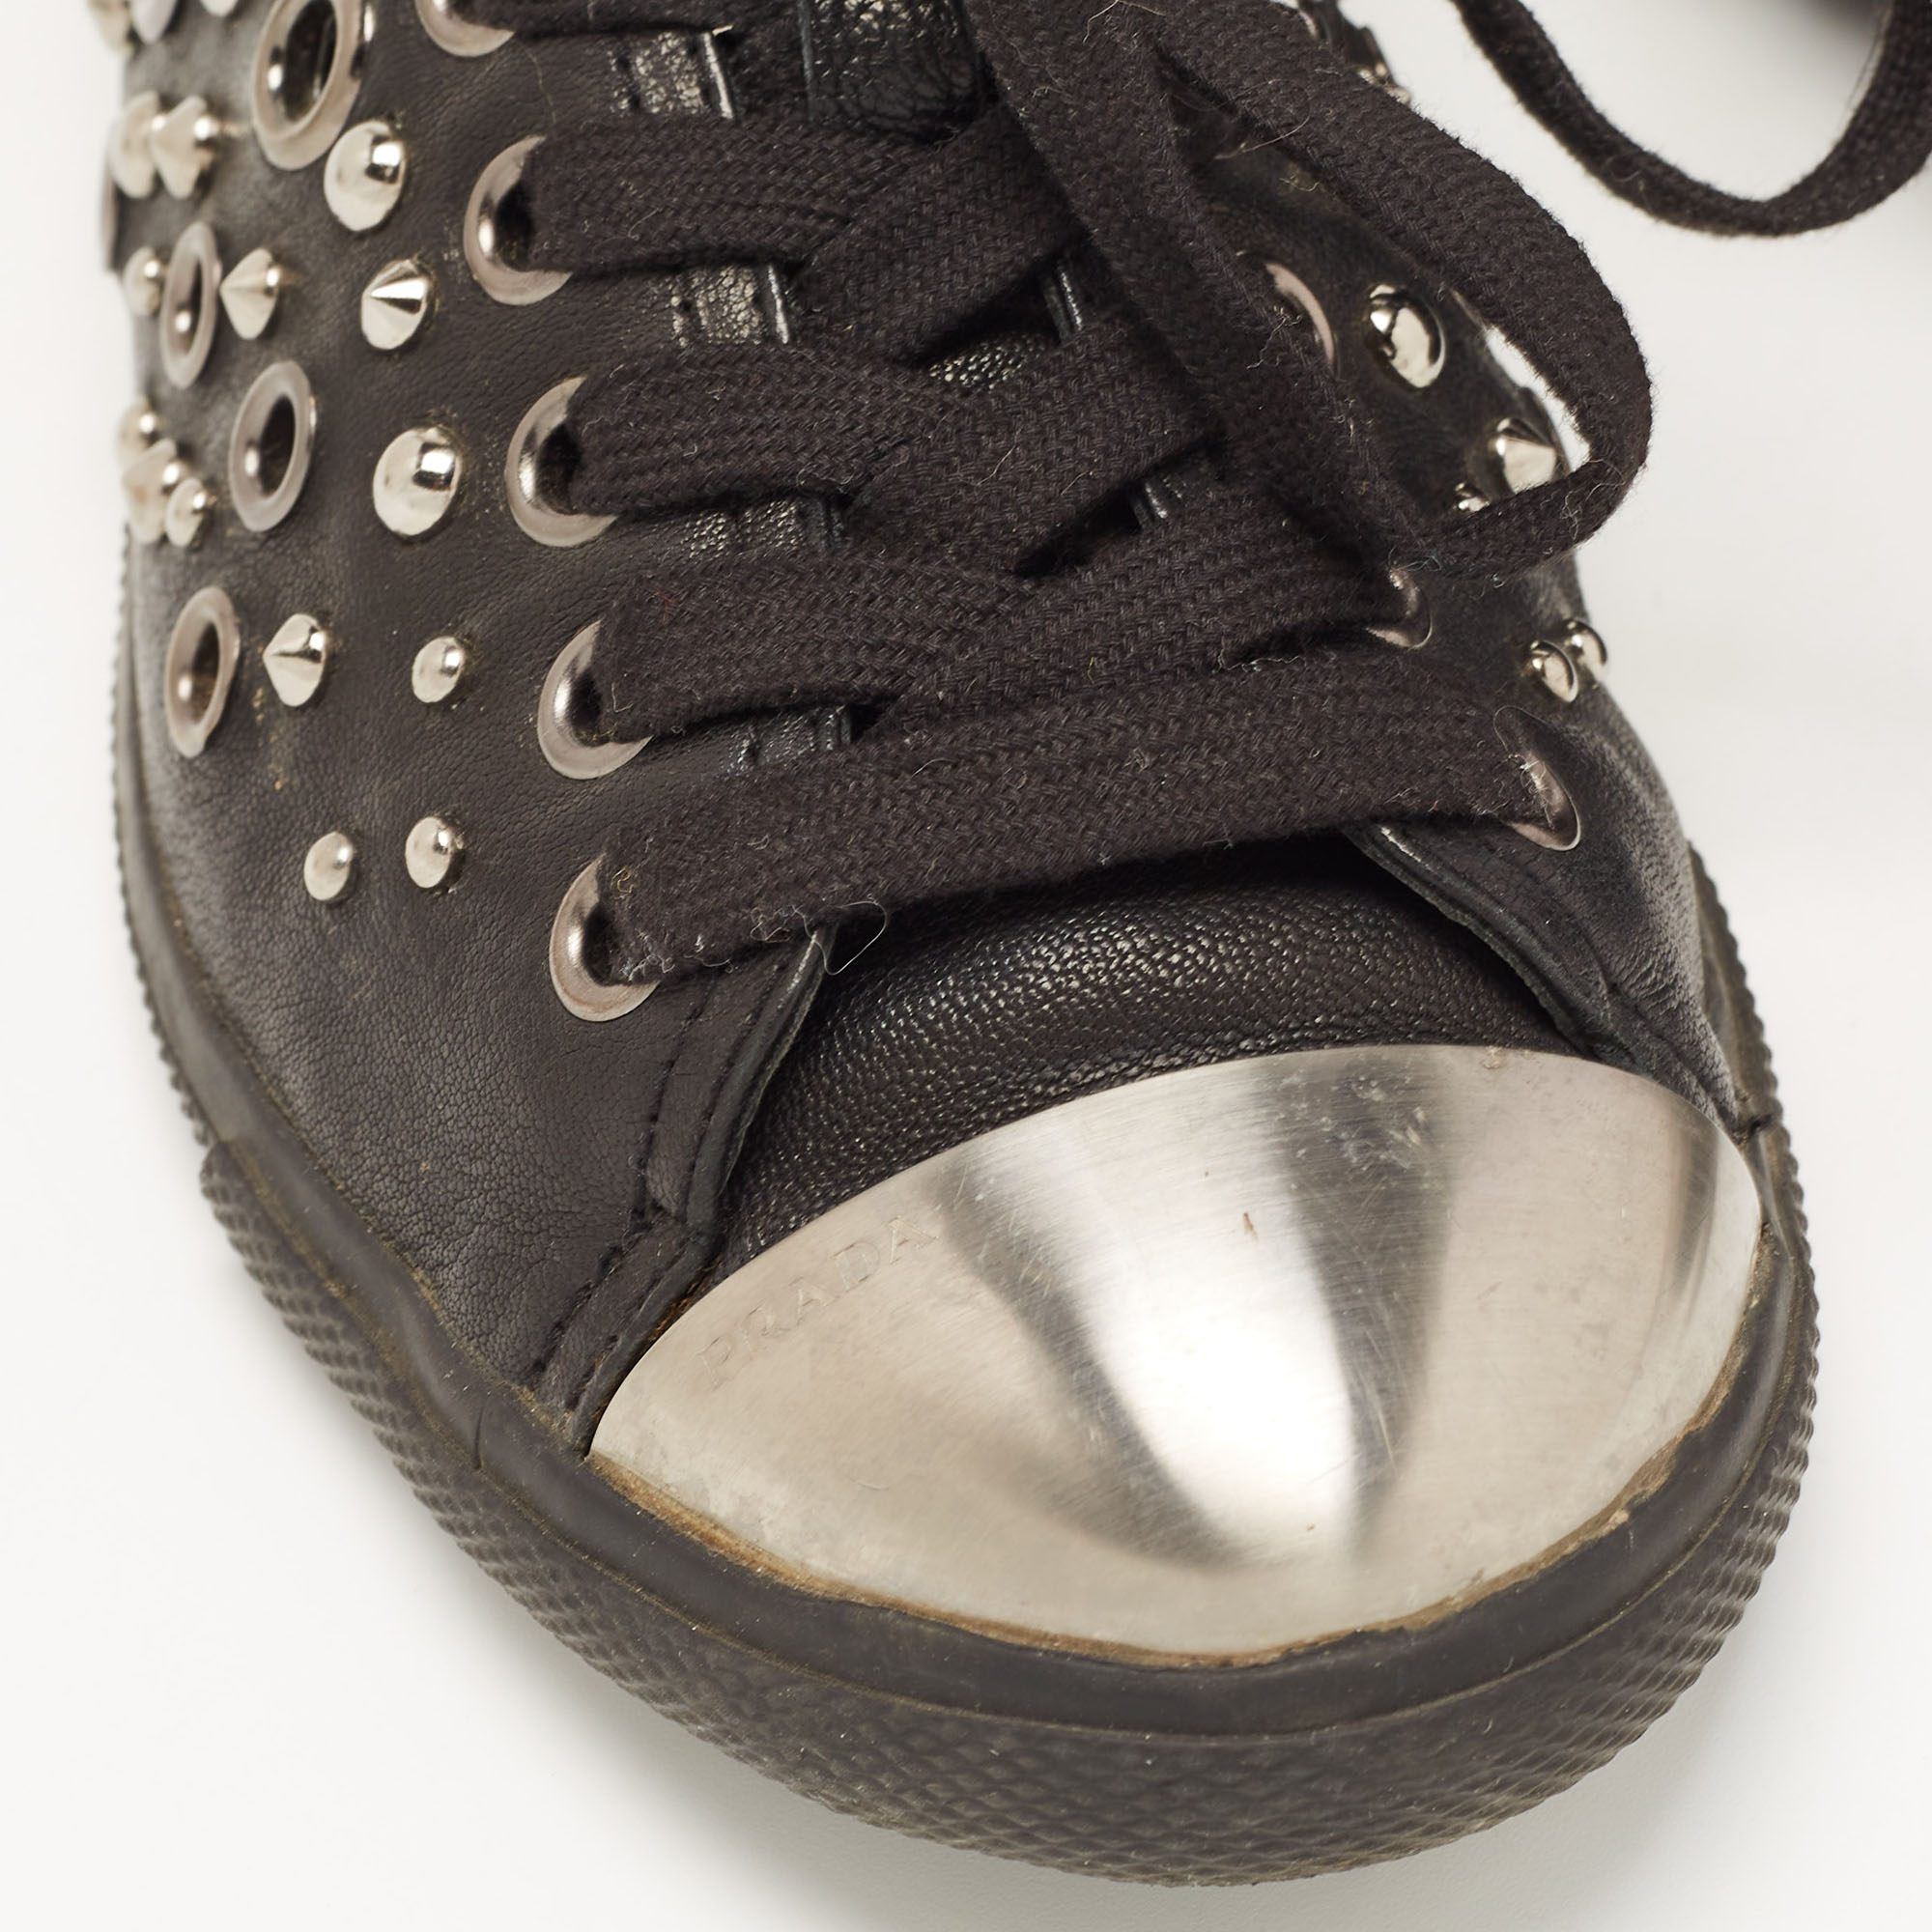 Prada Sport Black Leather Studded Low Top Sneakers Size 37